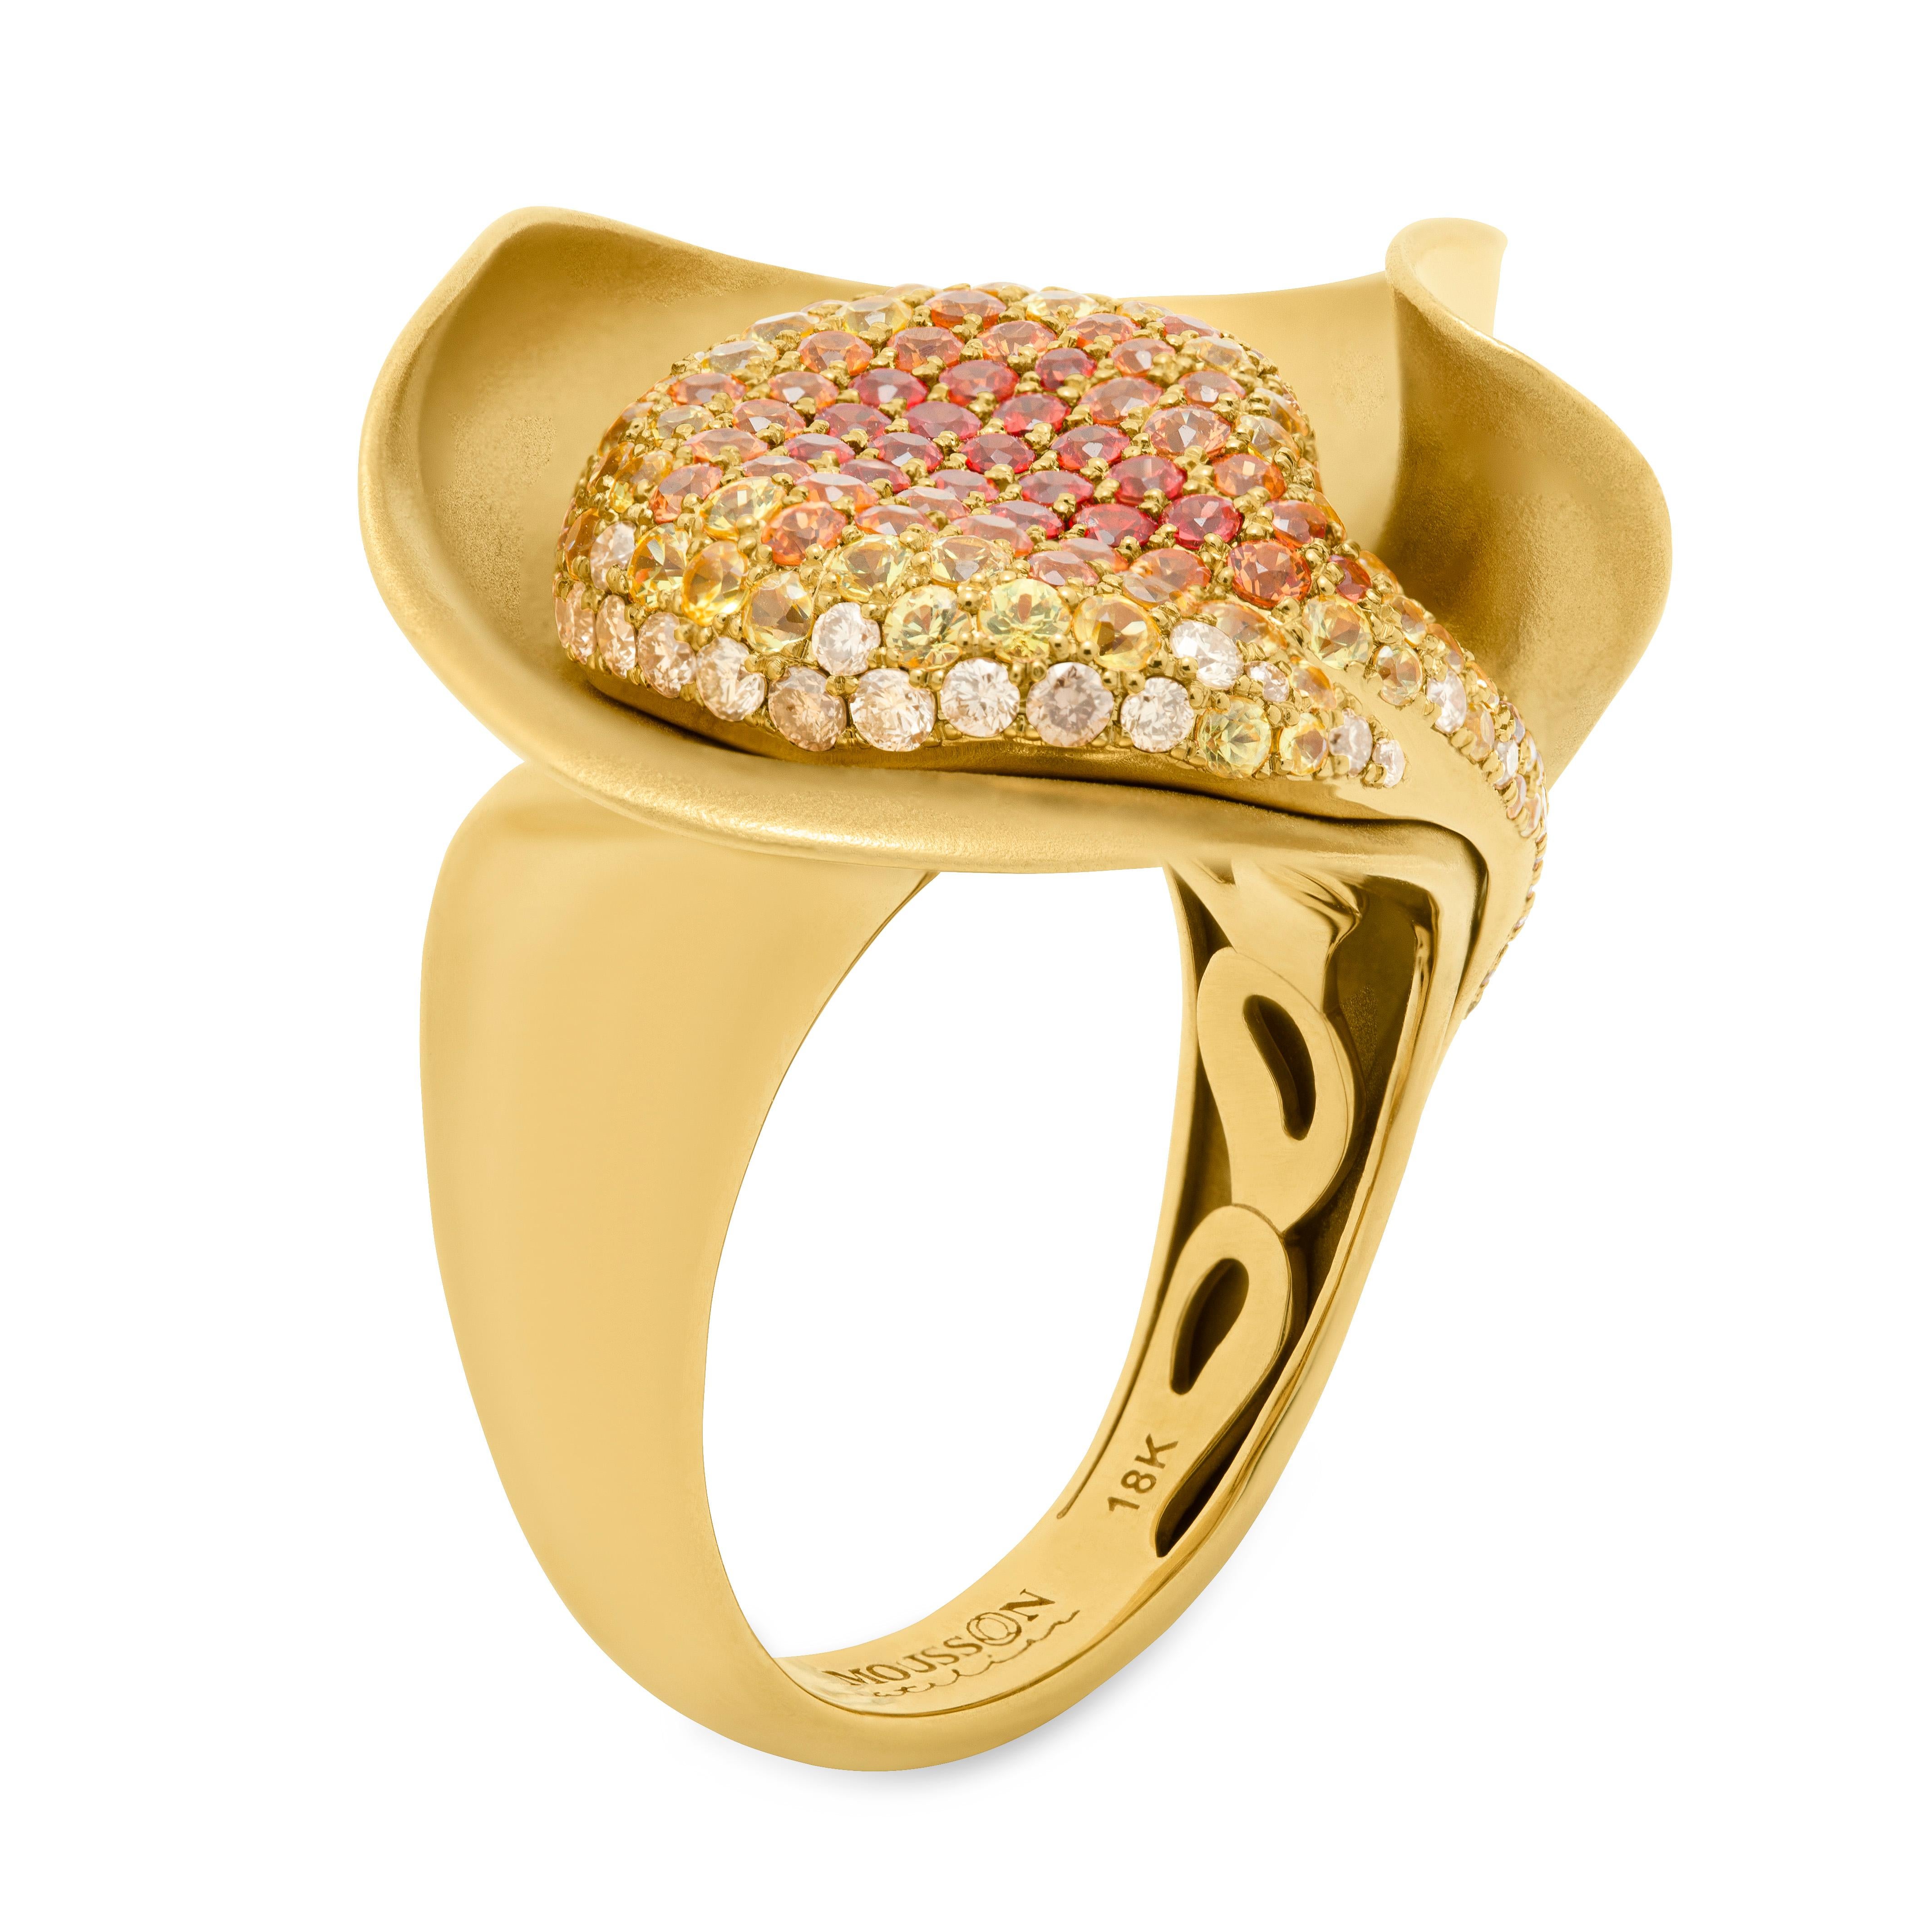 Diamonds Multi-Color Sapphires 18 Karat Yellow Gold Ring
Have you ever seen how the Sunlight plays on Silk? Our designers cath this moment in this Beautiful Ring. The graduation of 45 Orange, 58 Yellow Sapphires to 70 Champagne Diamonds gives a full